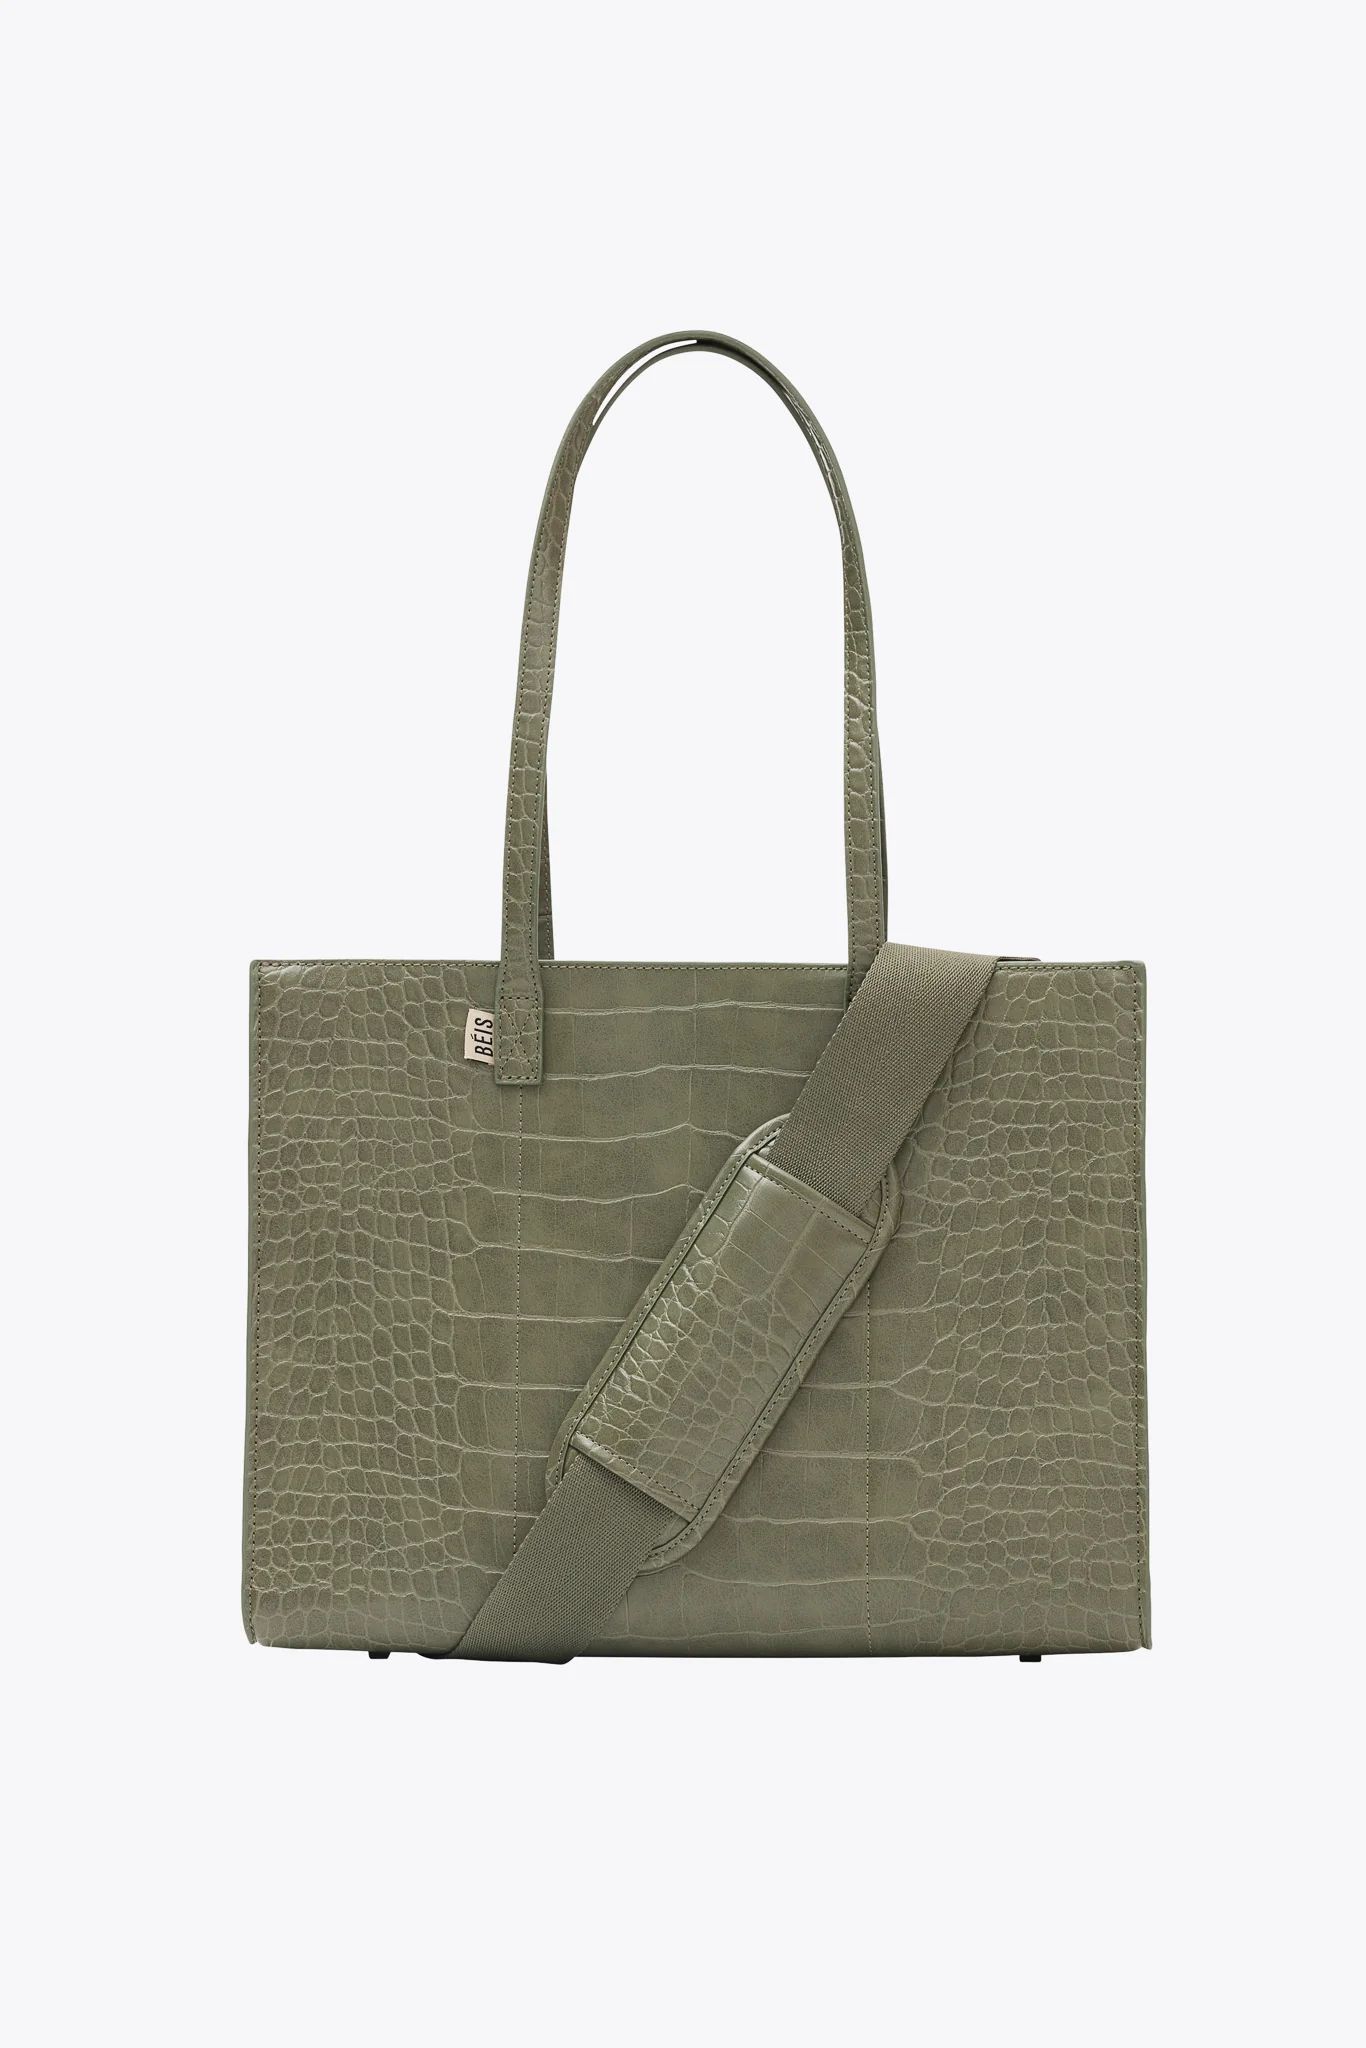 The Work Tote in Olive | BÉIS Travel